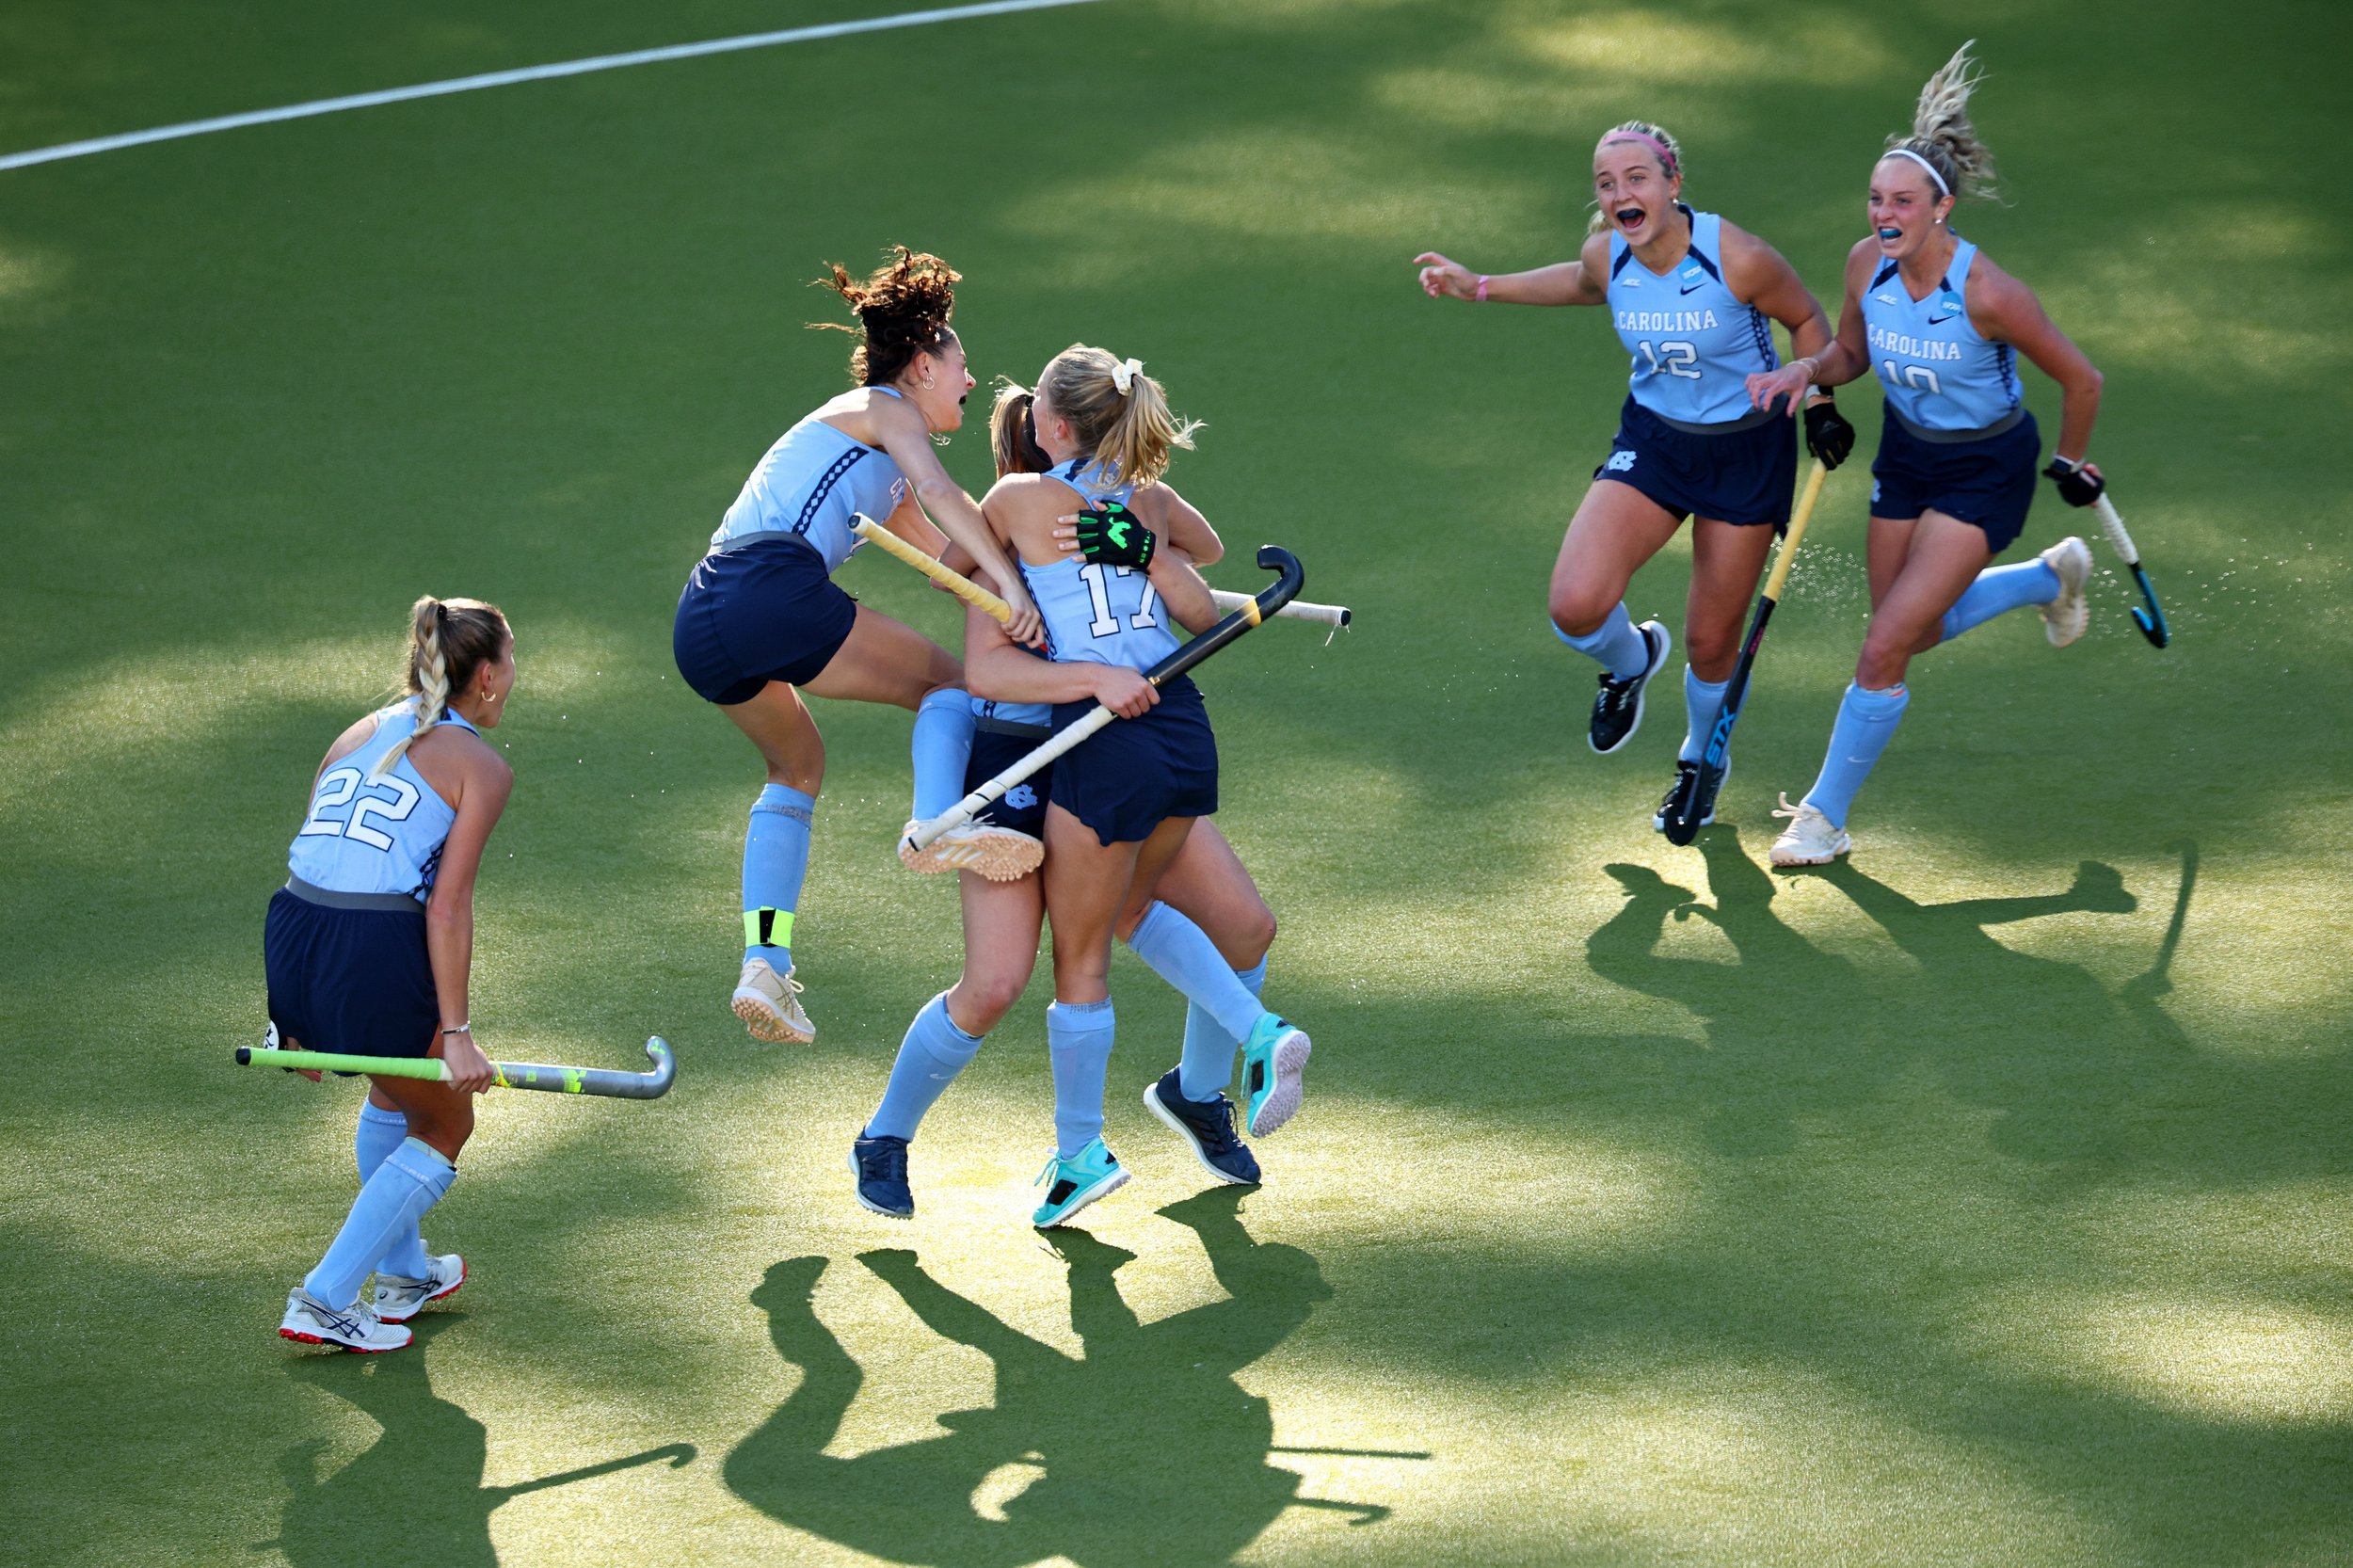  CHAPEL HILL, NORTH CAROLINA - NOVEMBER 19: The North Carolina Tar Heels celebrate their first goal against the Northwestern Wildcats during the Division I Women’s Field Hockey Championship held at Karen Shelton Stadium on November 19, 2023 in Chapel